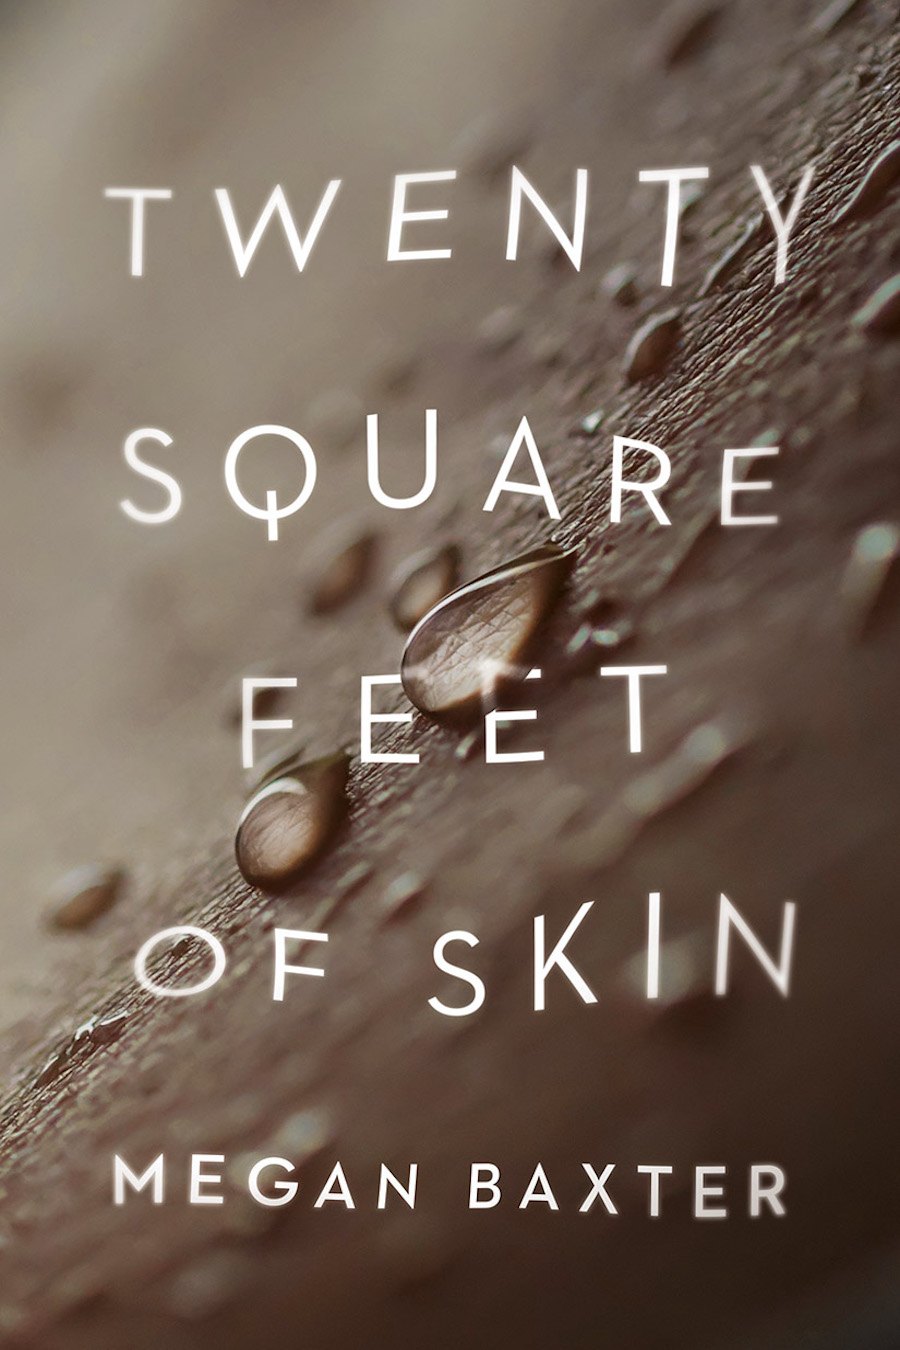 Front cover of Twenty Square Feet of Skin by Megan Baxter, featuring a close-up of a person's skin beaded with sweat.